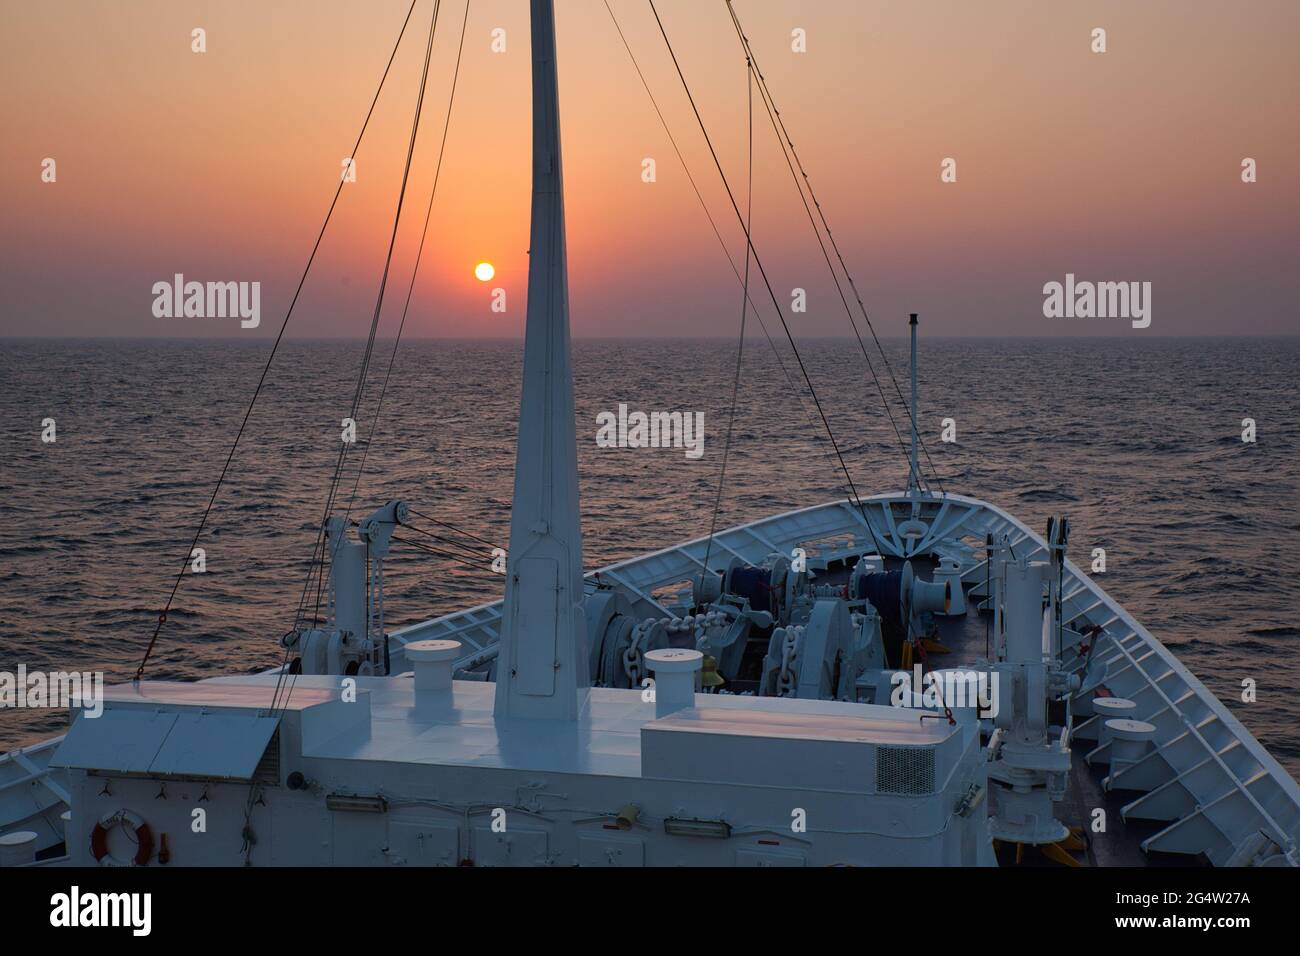 Sunset over the bows of a ship sailing in the Indian Ocean Stock Photo